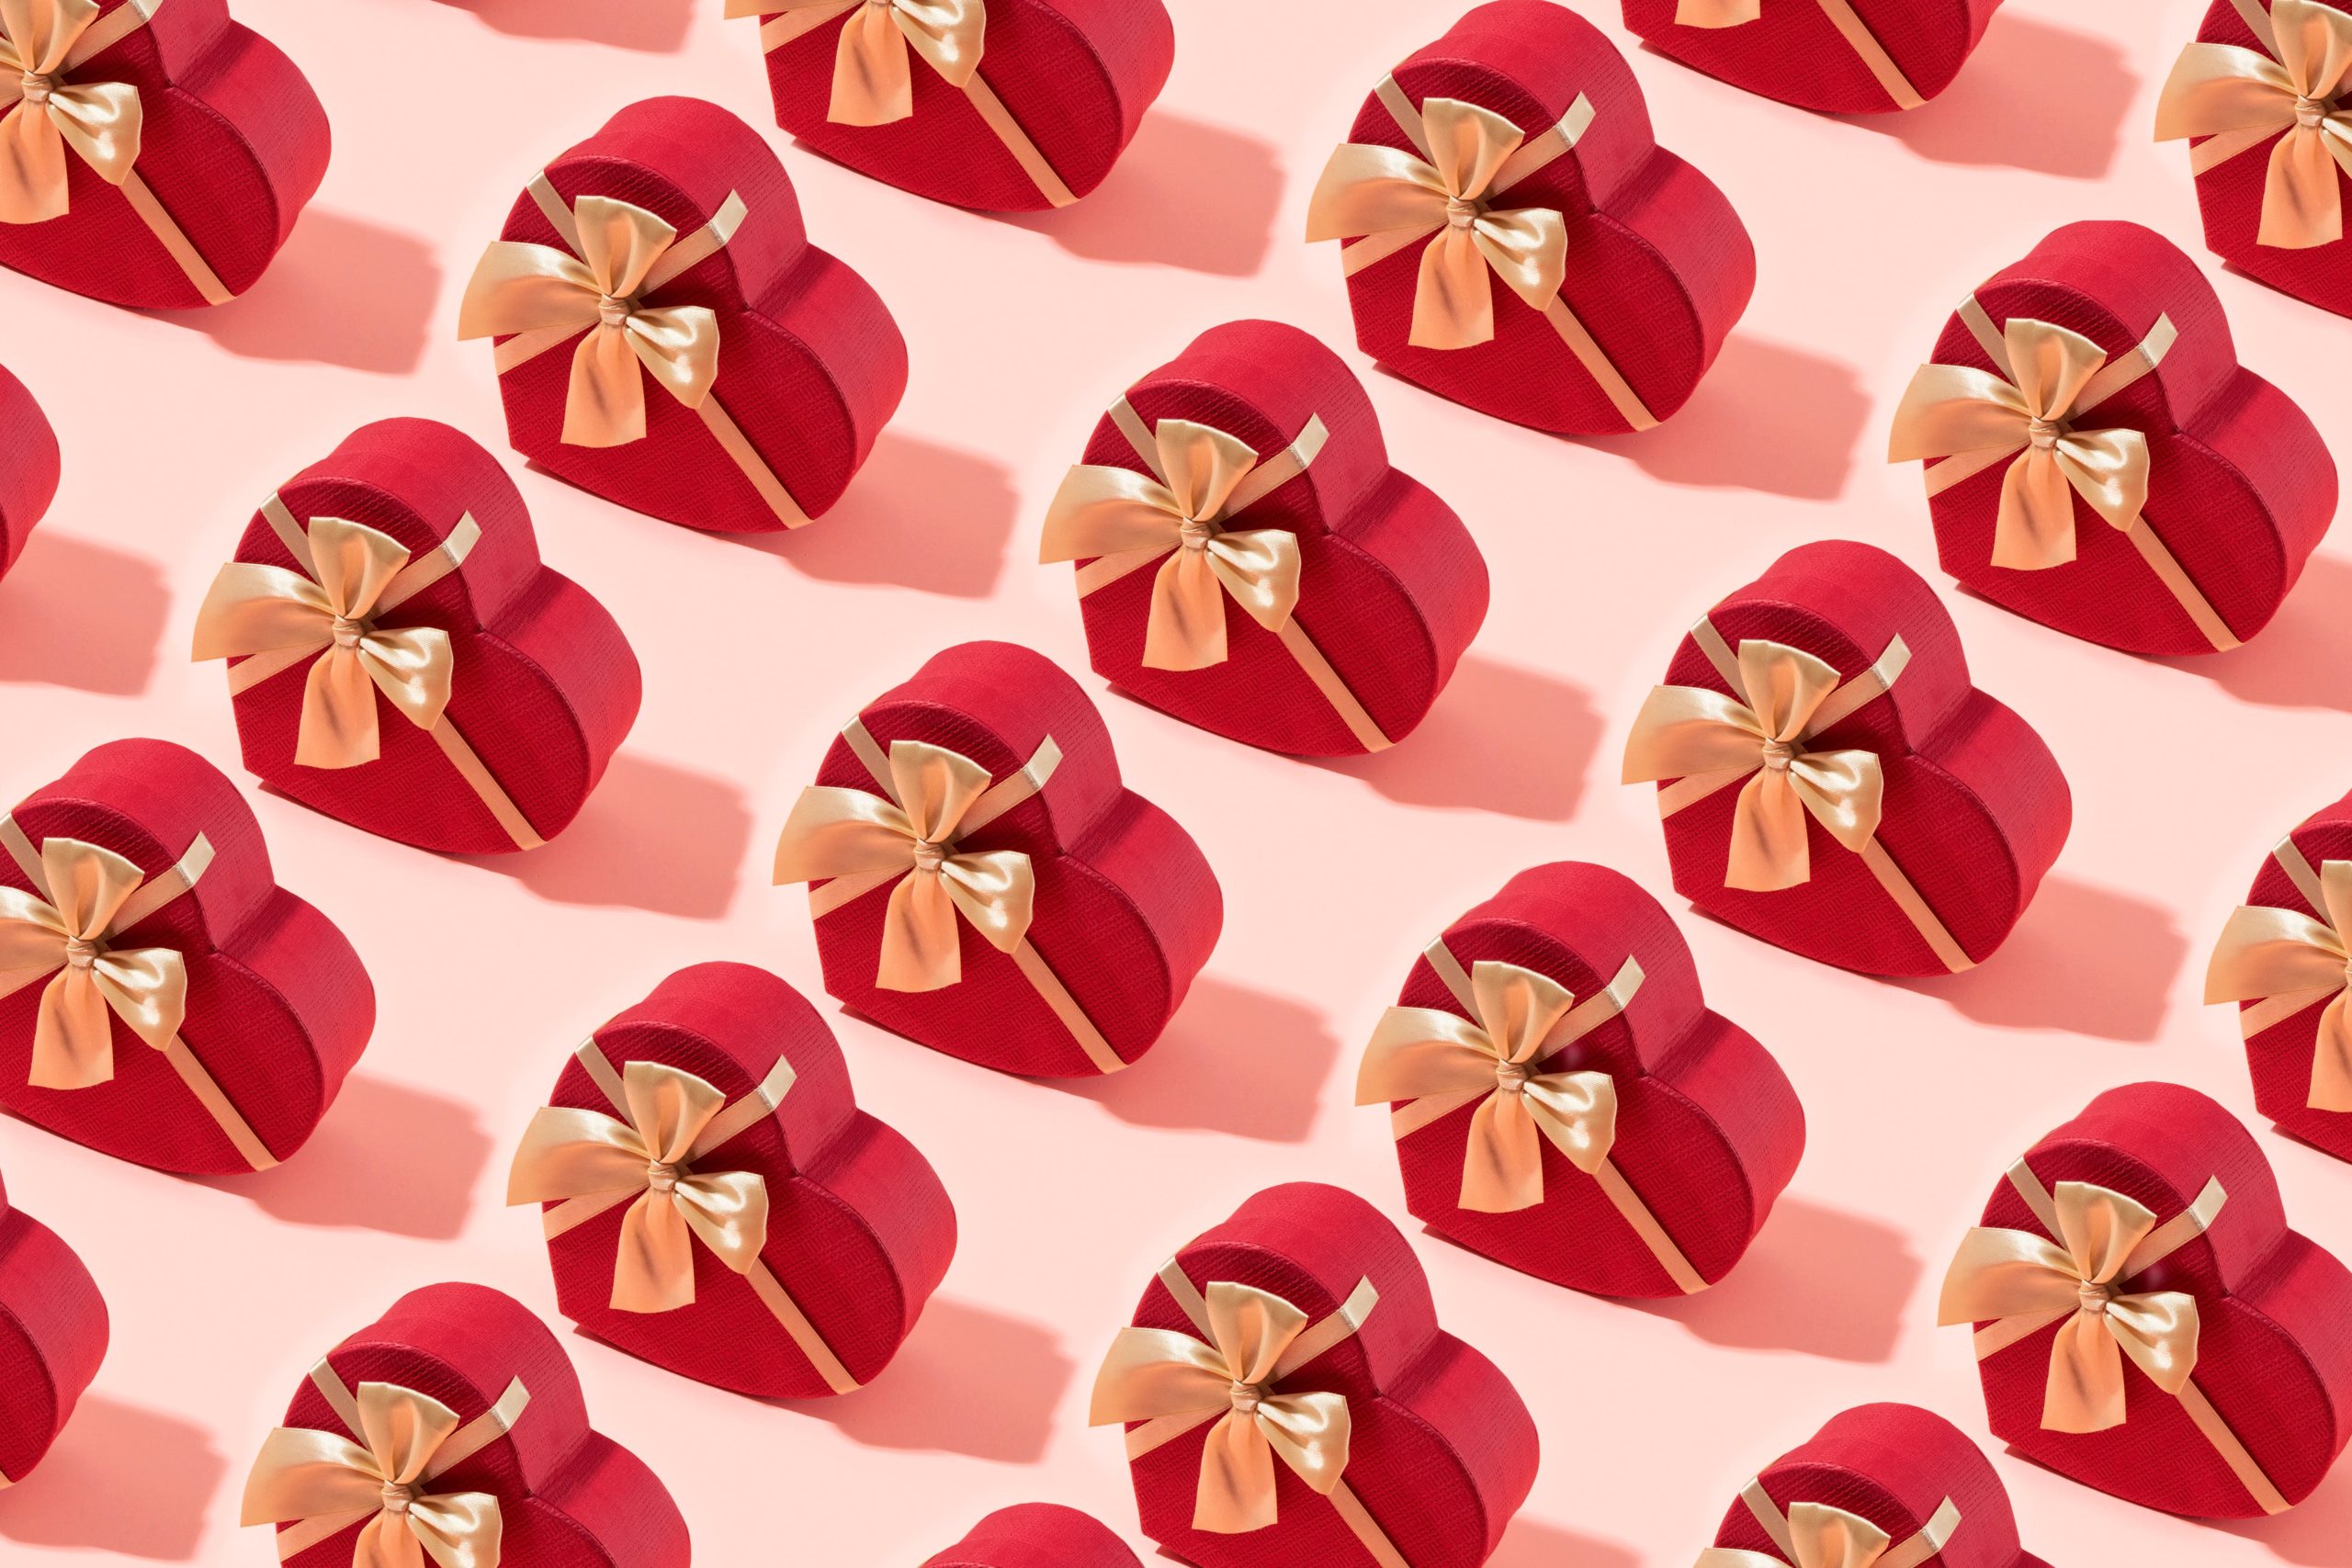 20 Valentine’s Day gifts your sweetheart will really love this year